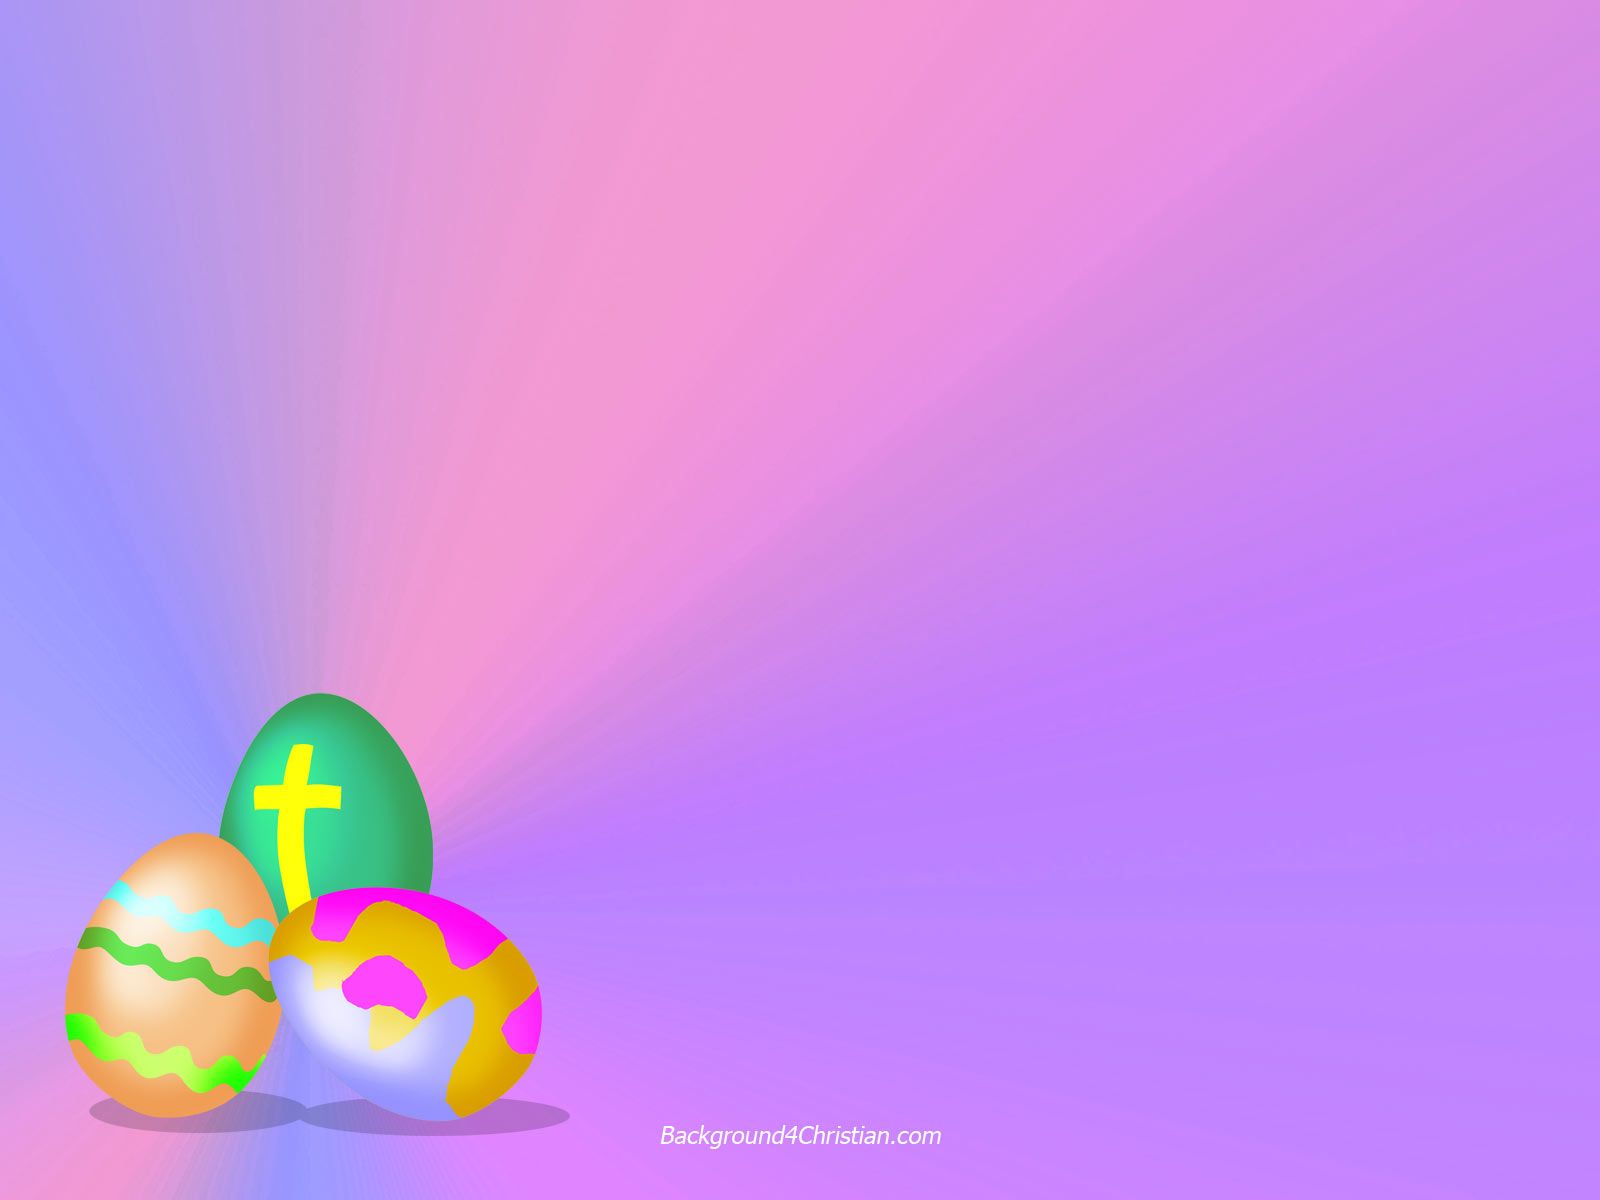 Free Easter Background Clipart, Download Free Clip Art, Free Clip